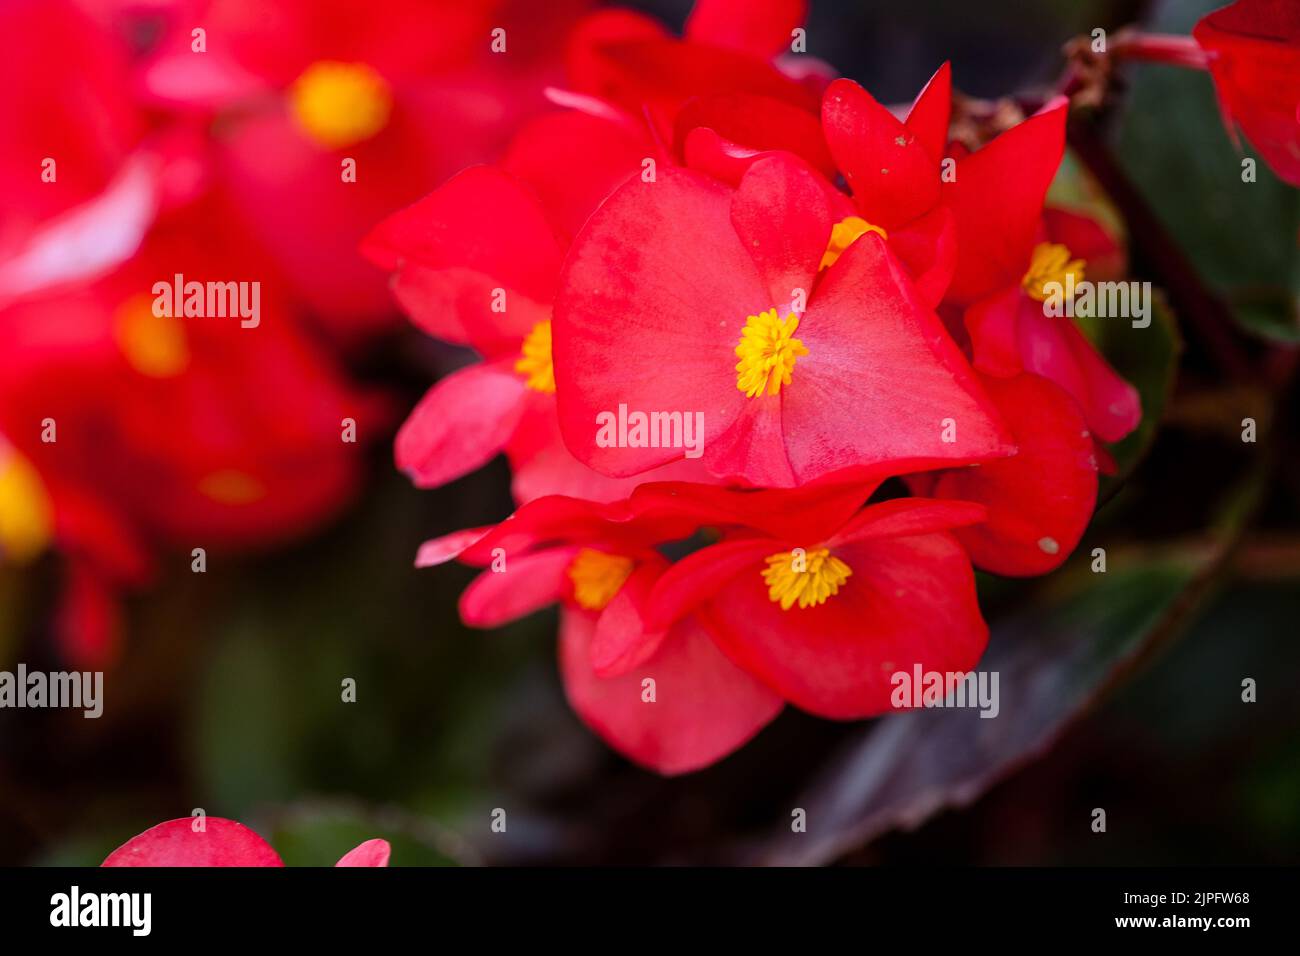 Closeup photo of a Red Bedding Begonia (Begonia cucullata Willd. var. cucullata ) flower Stock Photo